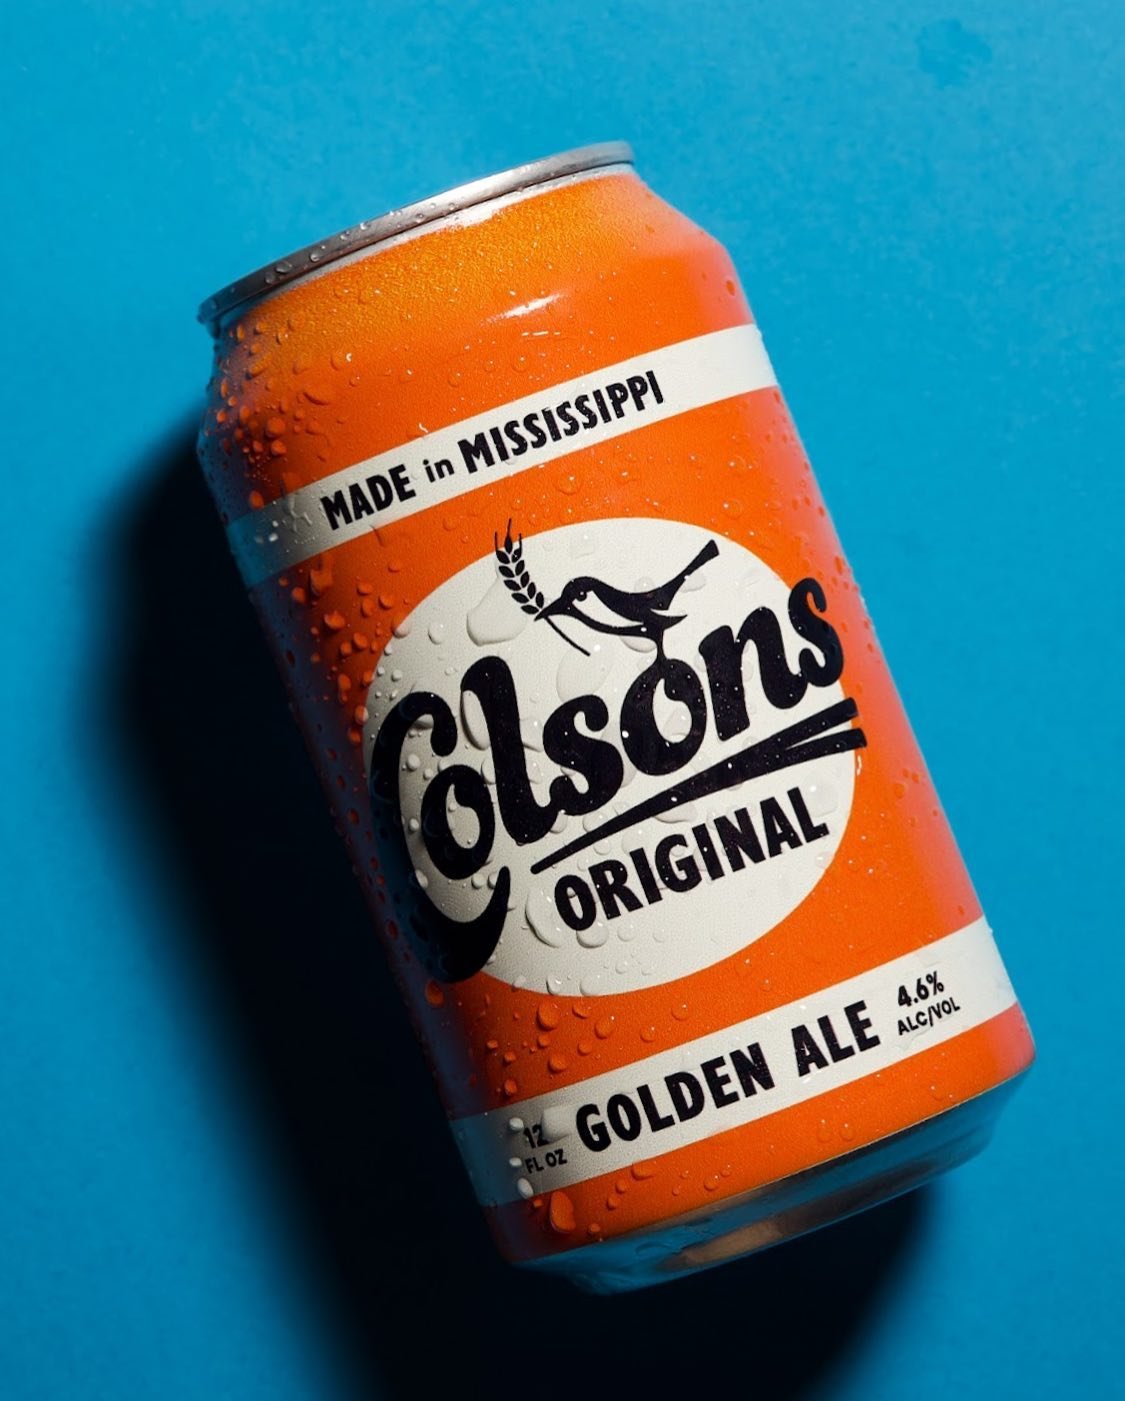 Did you know we own and make Colsons Golden Ale? This local favorite became an FG beer last summer and fits in perfectly with our crispy, approachable beer lineup. 

We switched it to cans so you can enjoy Colsons on the boat, by the pool, or anywher